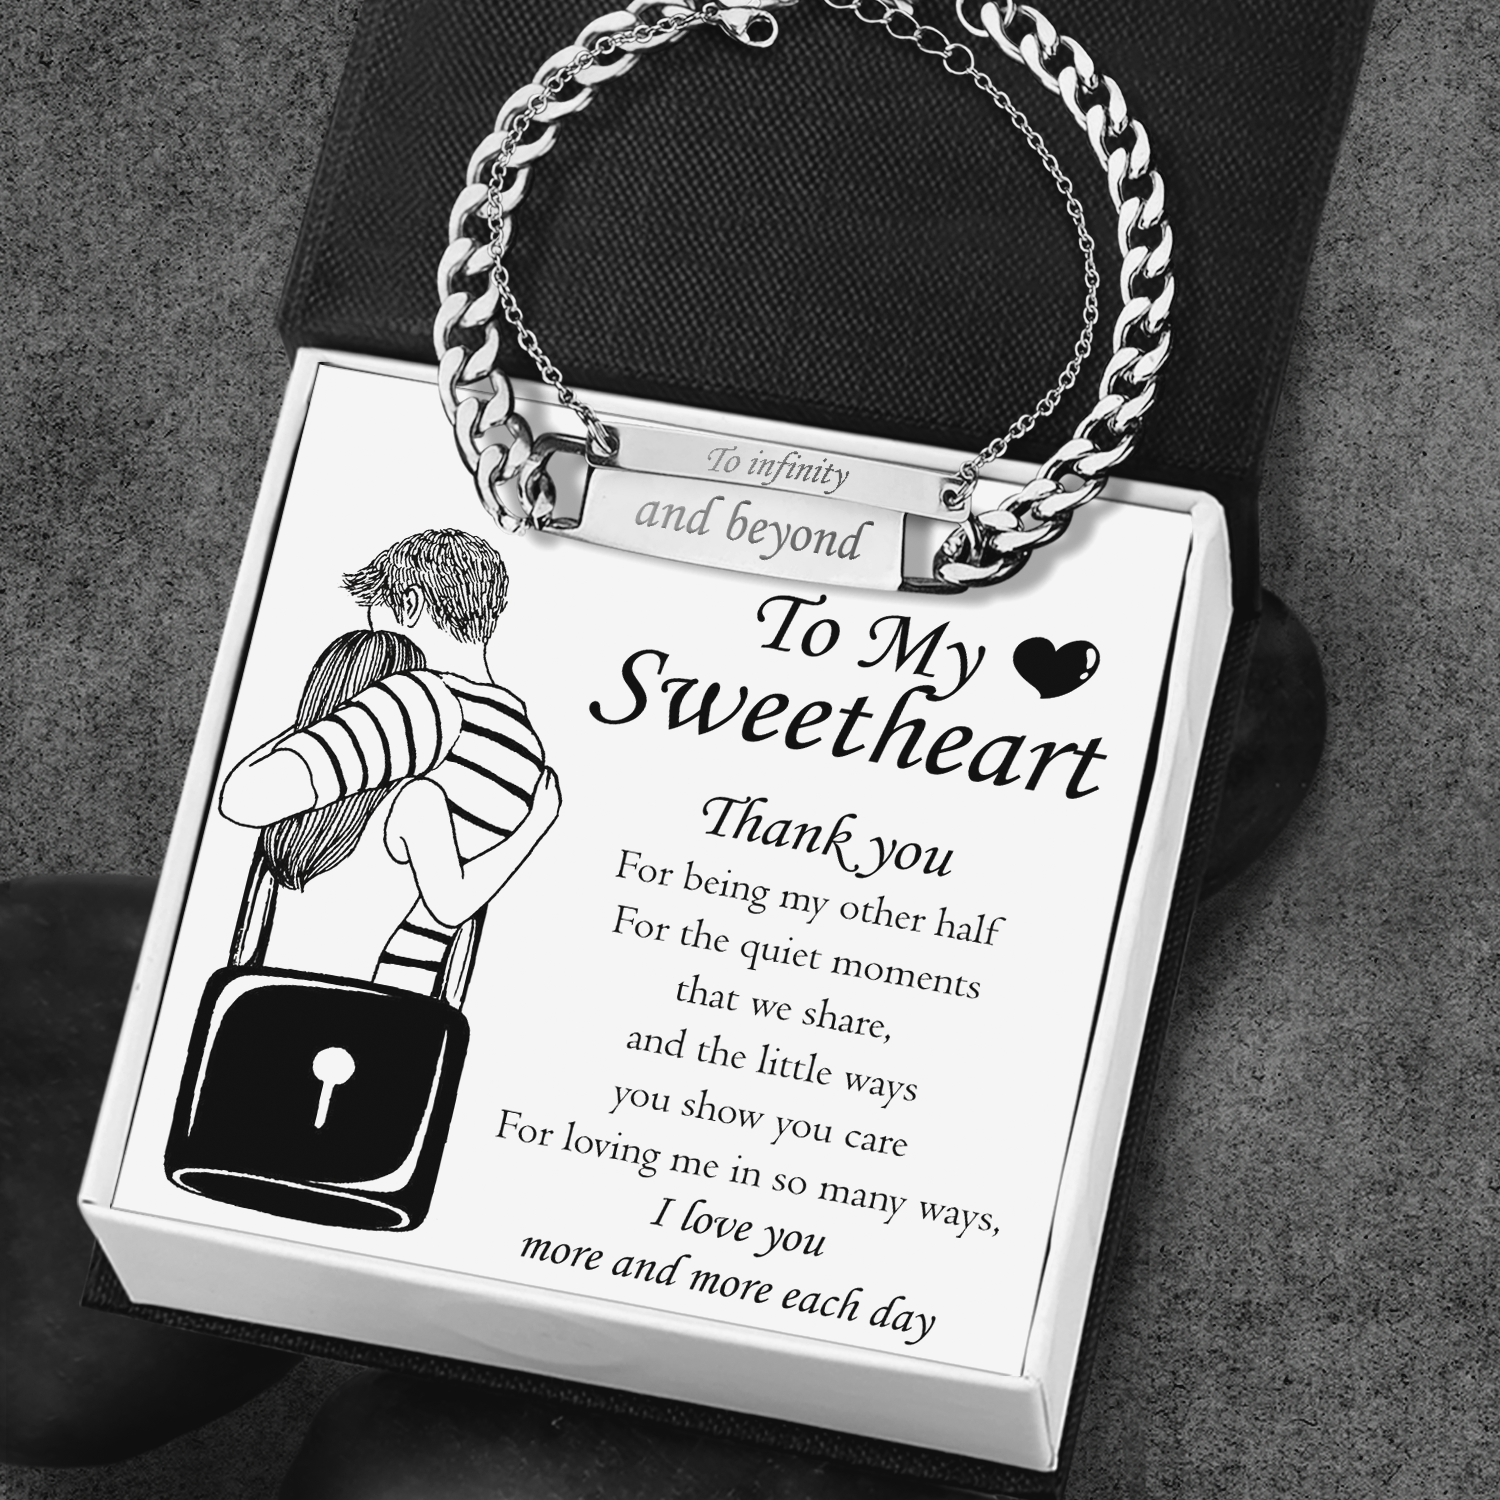 Engraving Couple Bracelet - Family - To My Sweetheart - I Love You More And More Each Day - Ukgbzb13001